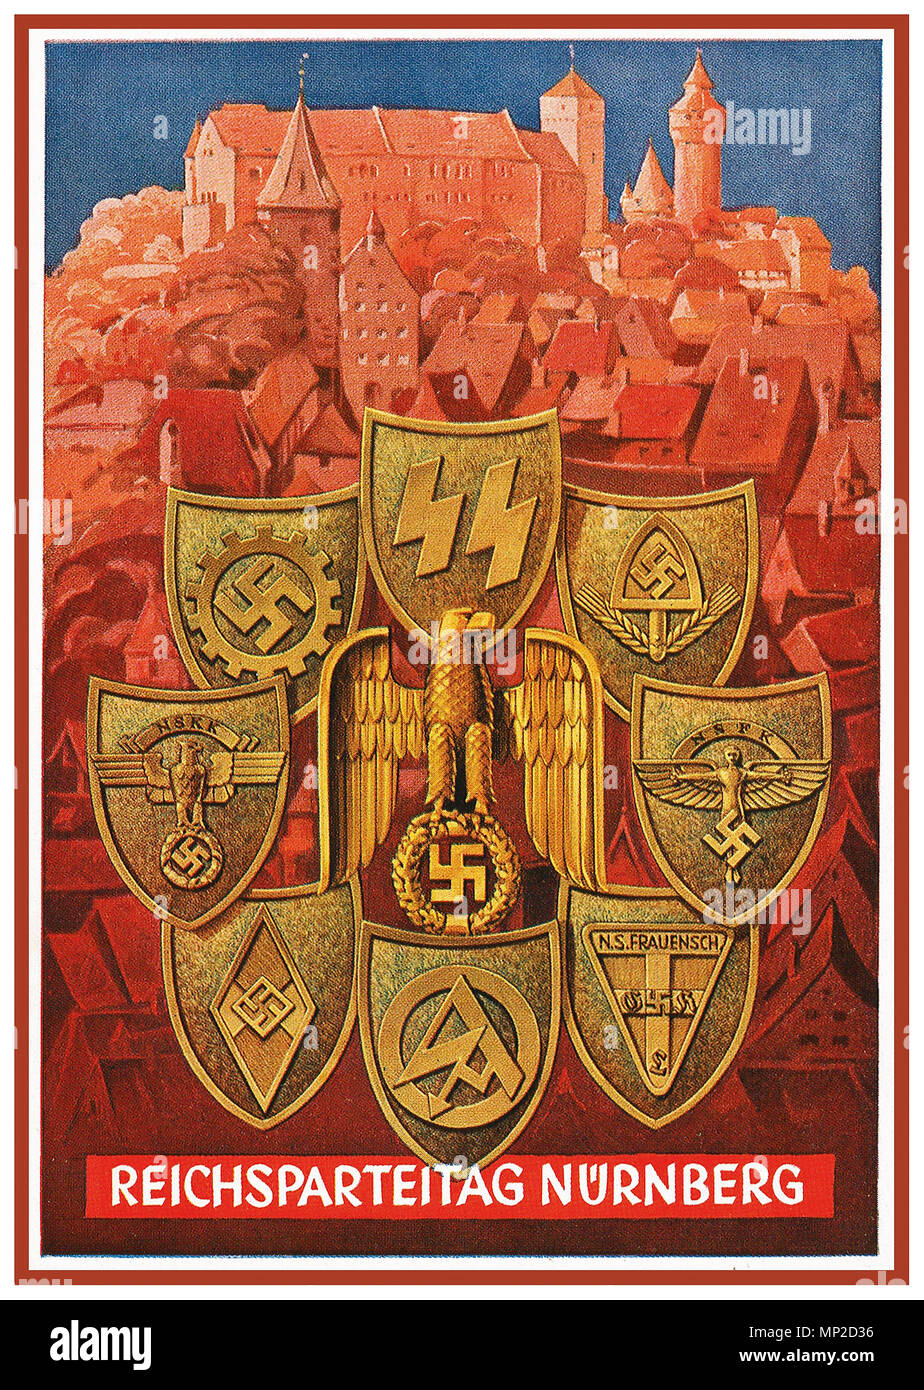 1930's Vintage Poster Nazi 'Reichsparteitage' propaganda events, with Adolf Hitler's rise to power in 1933. These events were held at the Nazi party rally grounds in Nuremberg from 1933 to 1938 and are usually referred to in English as the 'Nuremberg Rallies'. Stock Photo